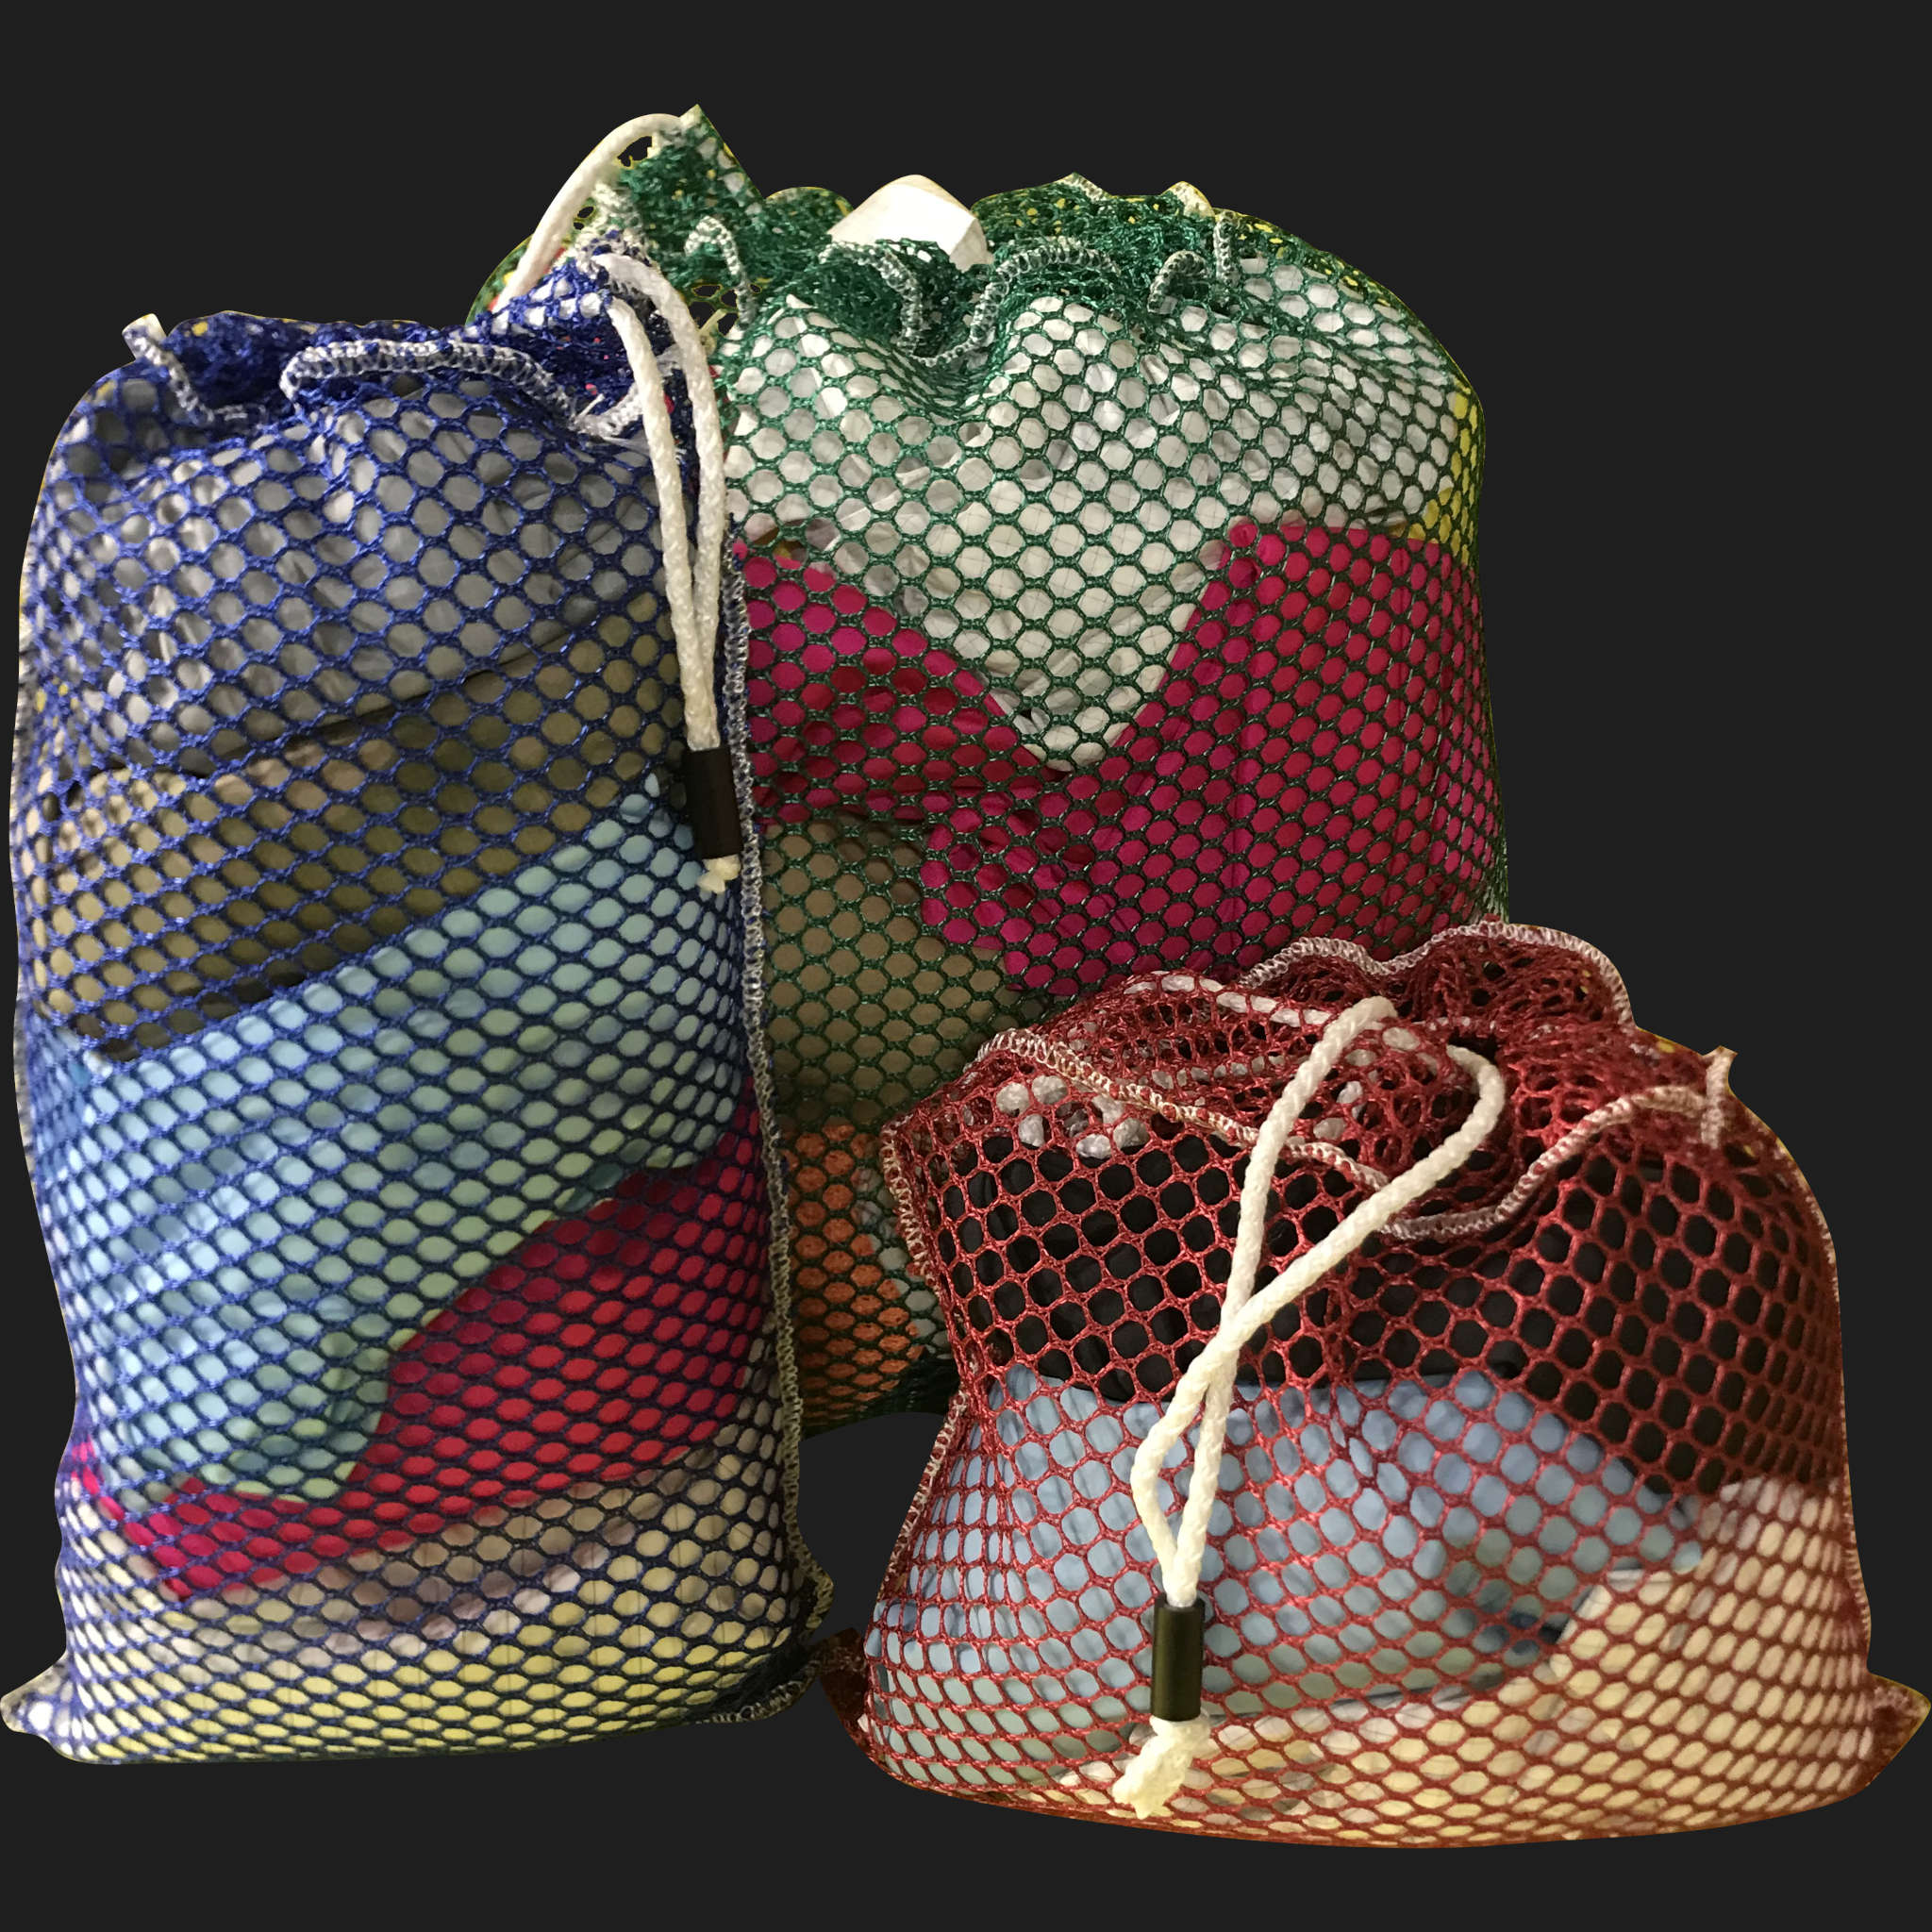 44" x 68" Customized Mesh-Net-Laundry Bags Heavy Duty with Cord and barrellock closure